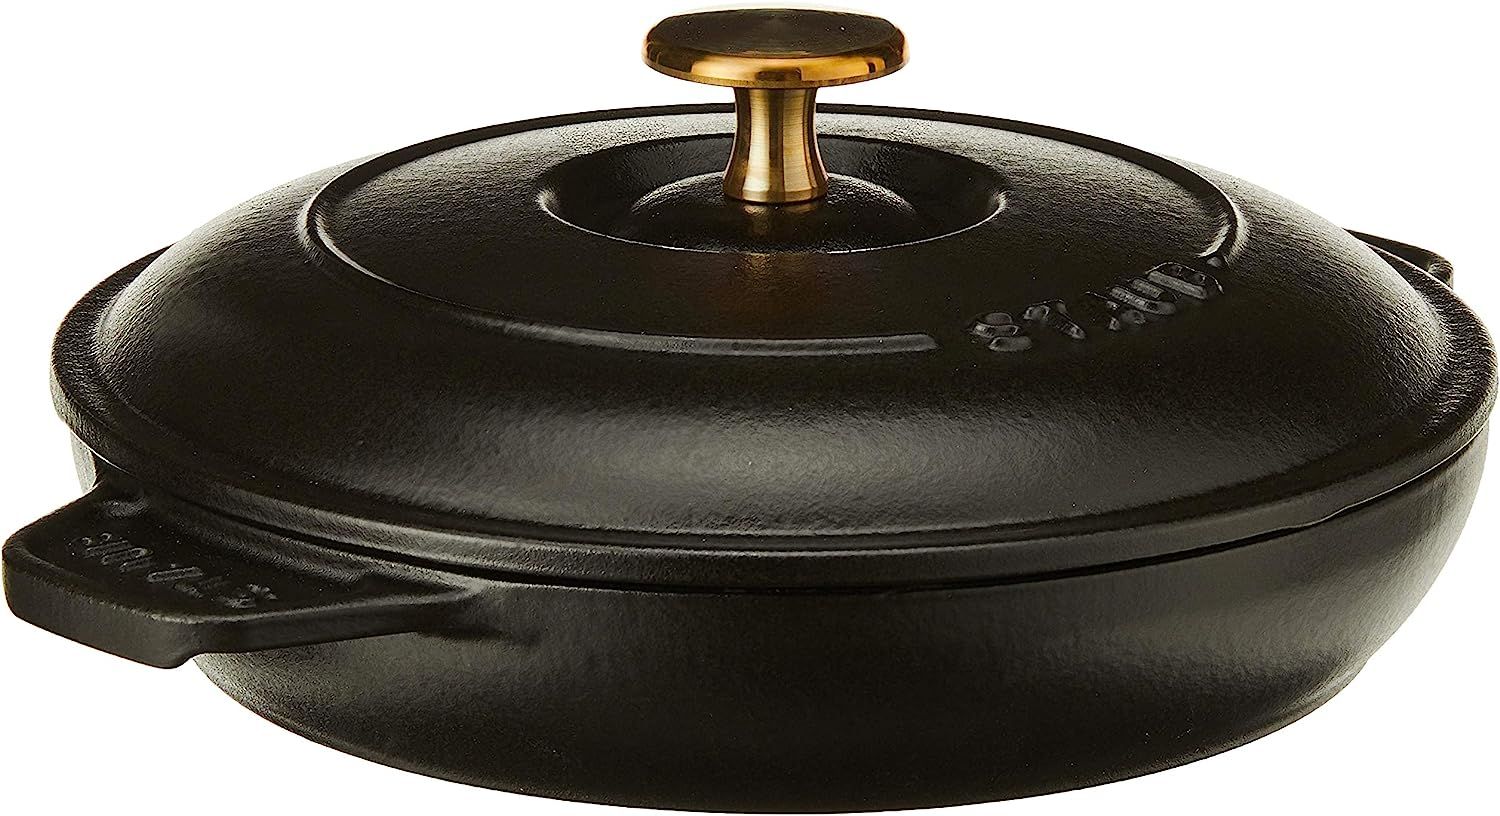 Staub Cast Iron 7.9-inch Round Covered Baking Dish - Matte Black, Made in France | Amazon (US)